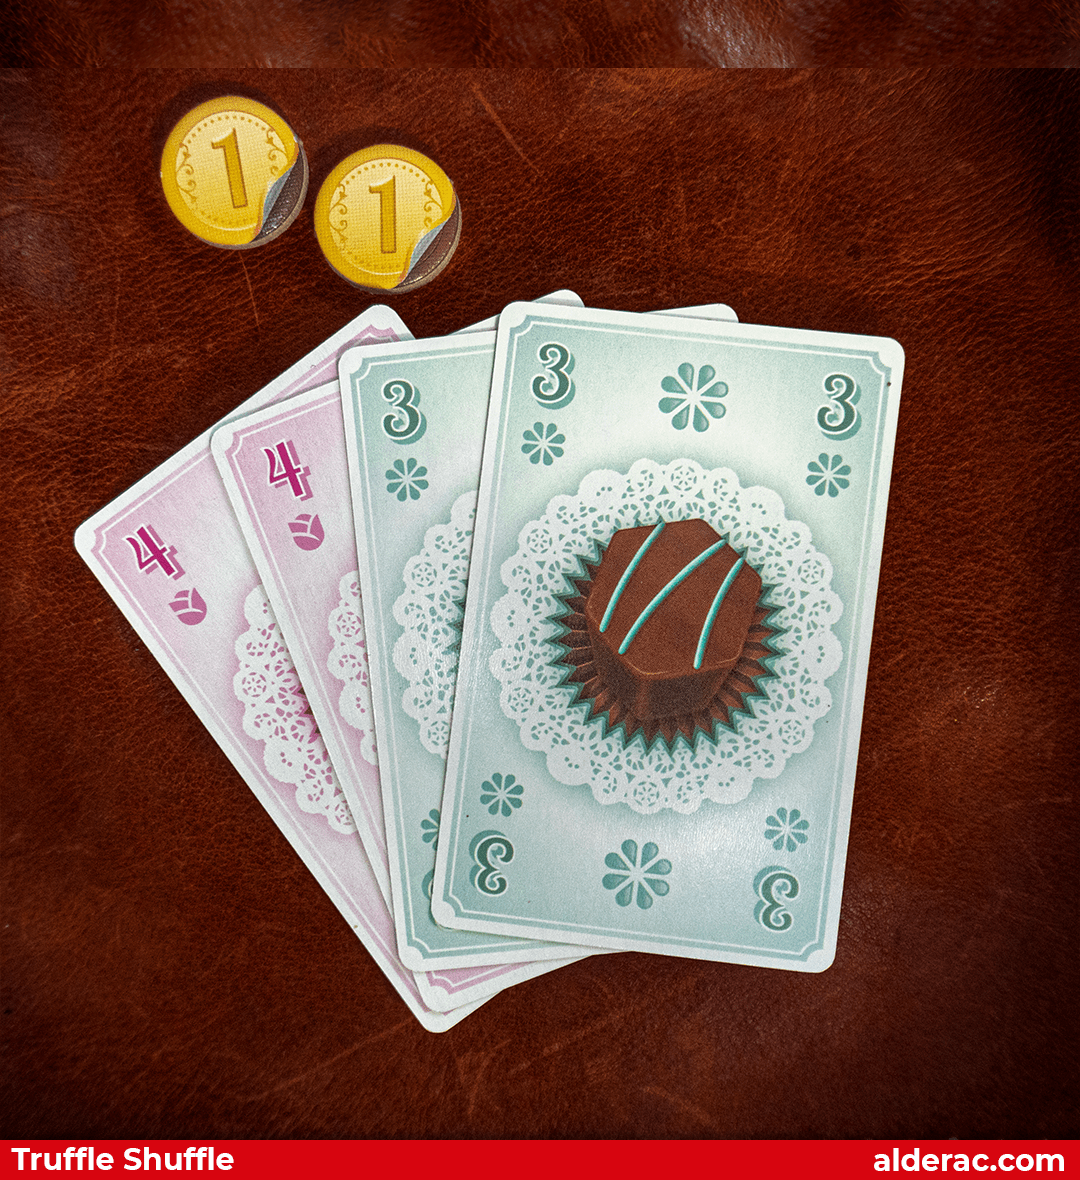 four truffle shuffle cards. Two number 4, two number 3 and two coins